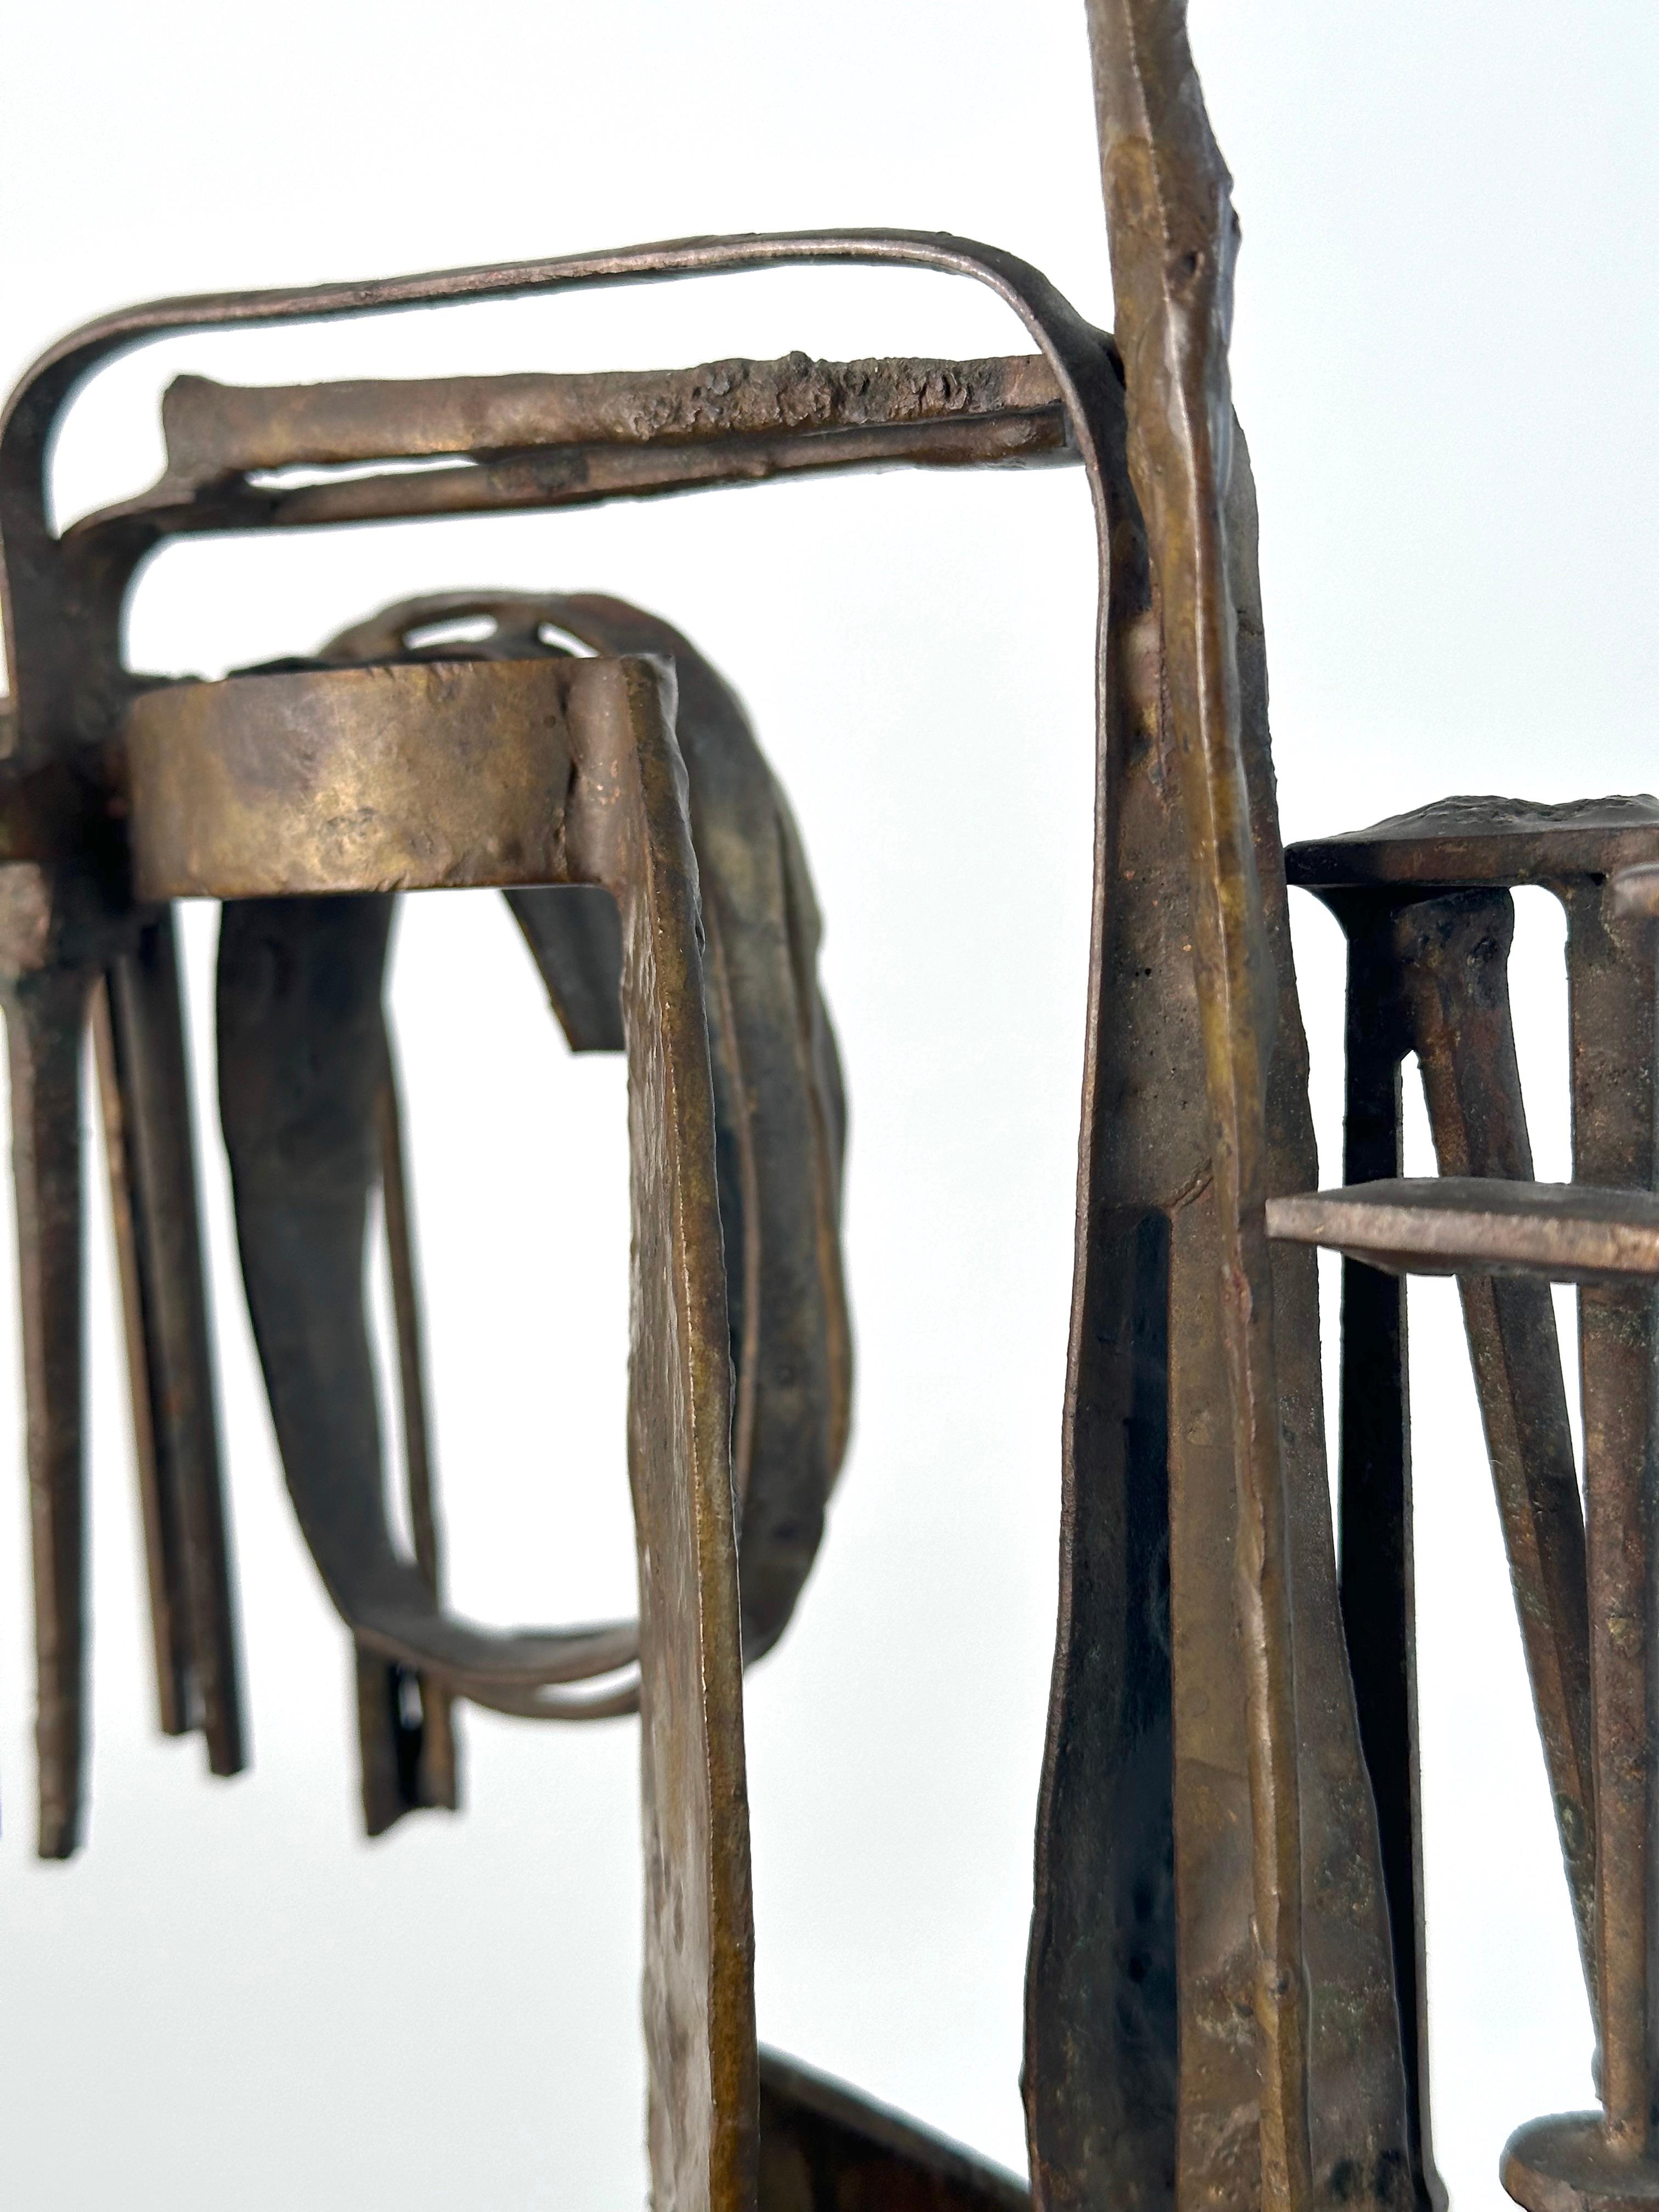 Duayne Hattchett ((1925-2015). Banner, 1958. Welded metal, sculpture measures 11 h. x 9 w. x 3.75 d. inches. Measuring a total of 17.5 inch high on base. Base measures 5.5 x 5.5 by 6 inches h. Signed, dated, titles on bottom of base. Excellent